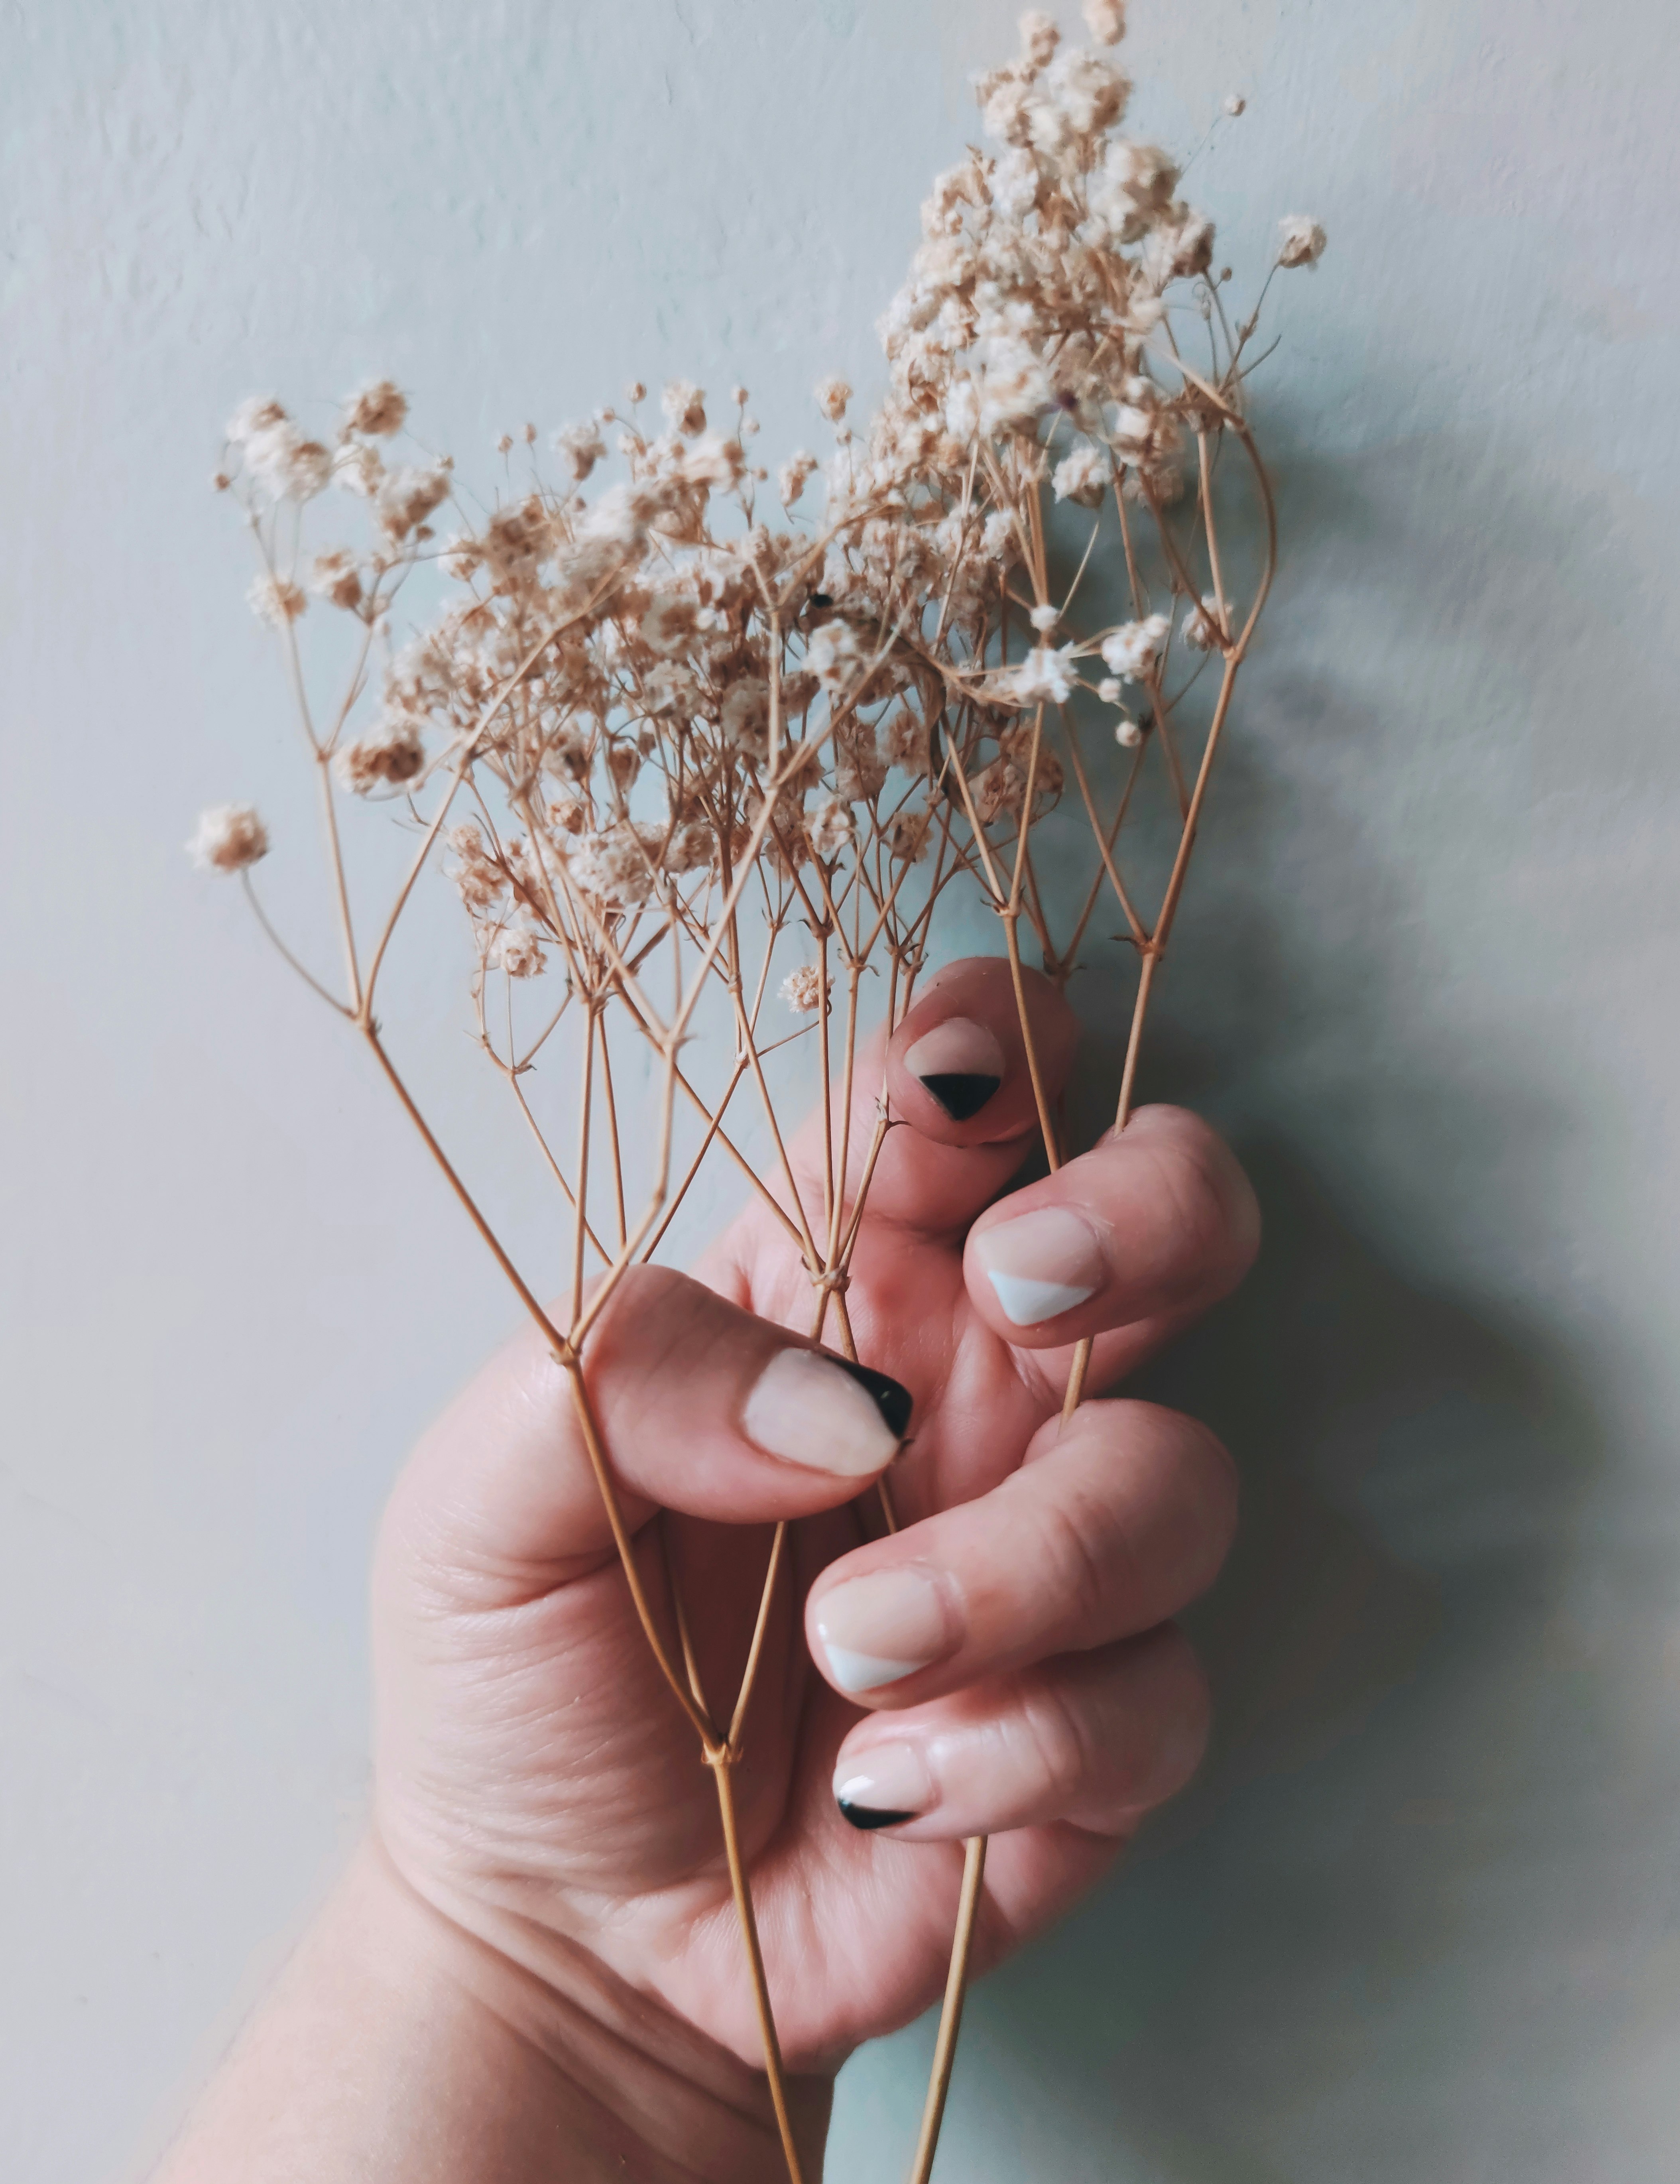 person holding white flower buds